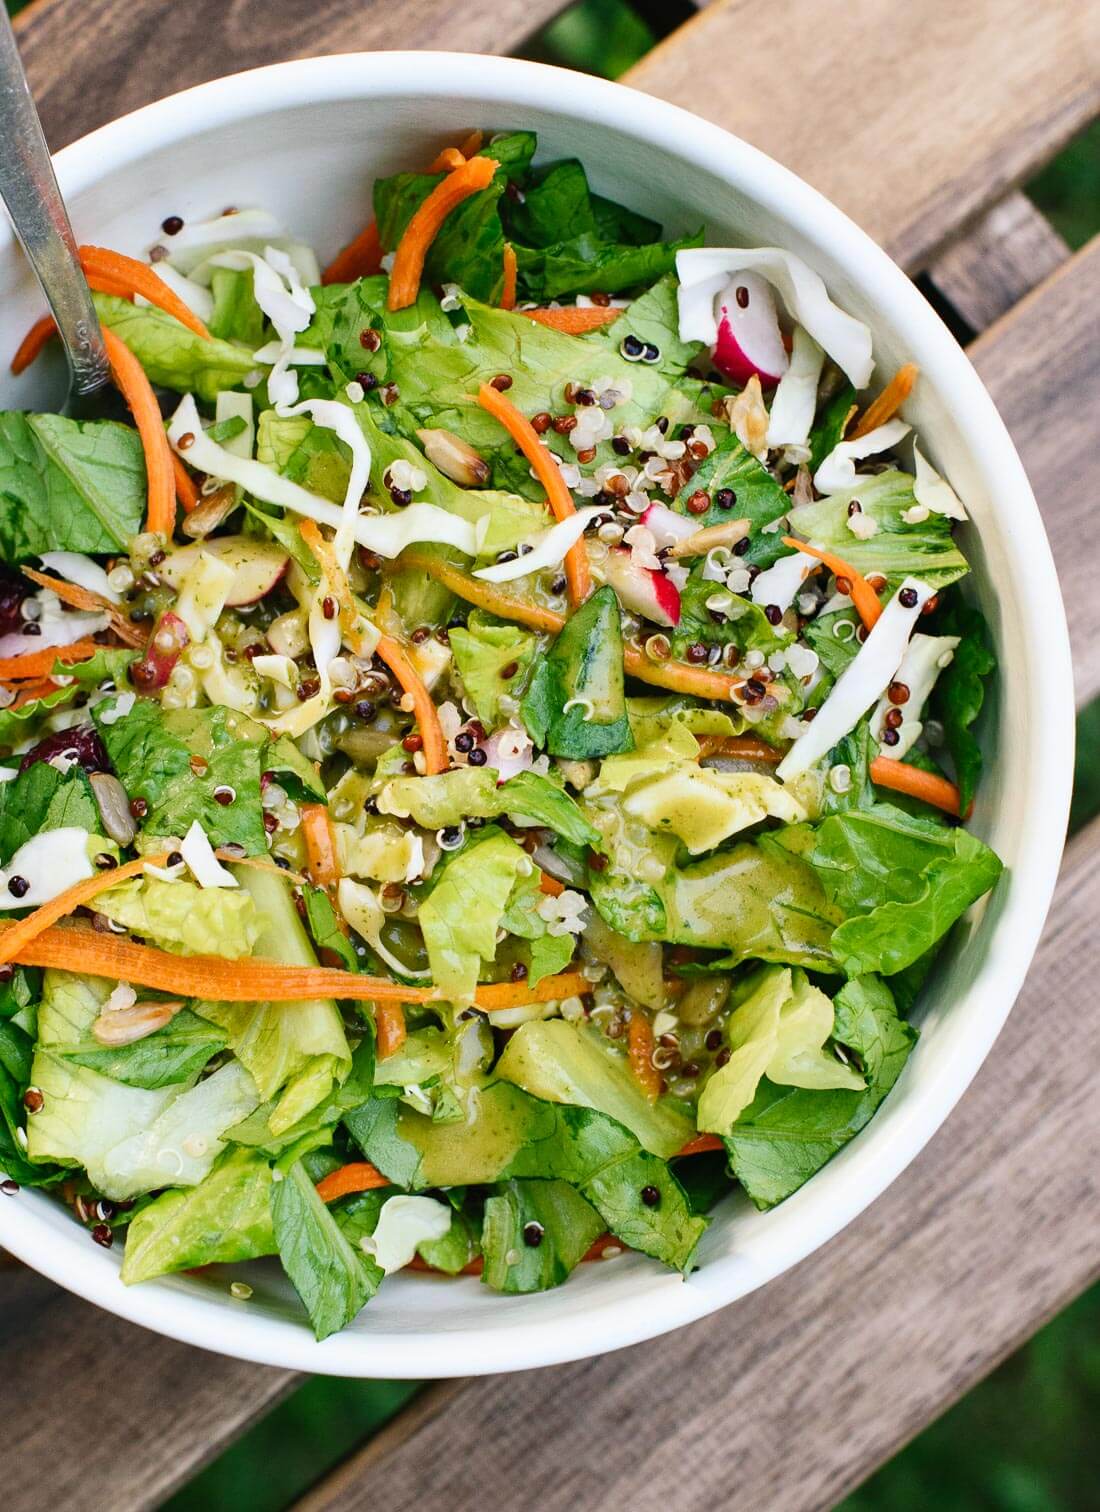 This mega crunchy romaine salad is bursting with fresh and flavorful ingredients! cookieandkate.com